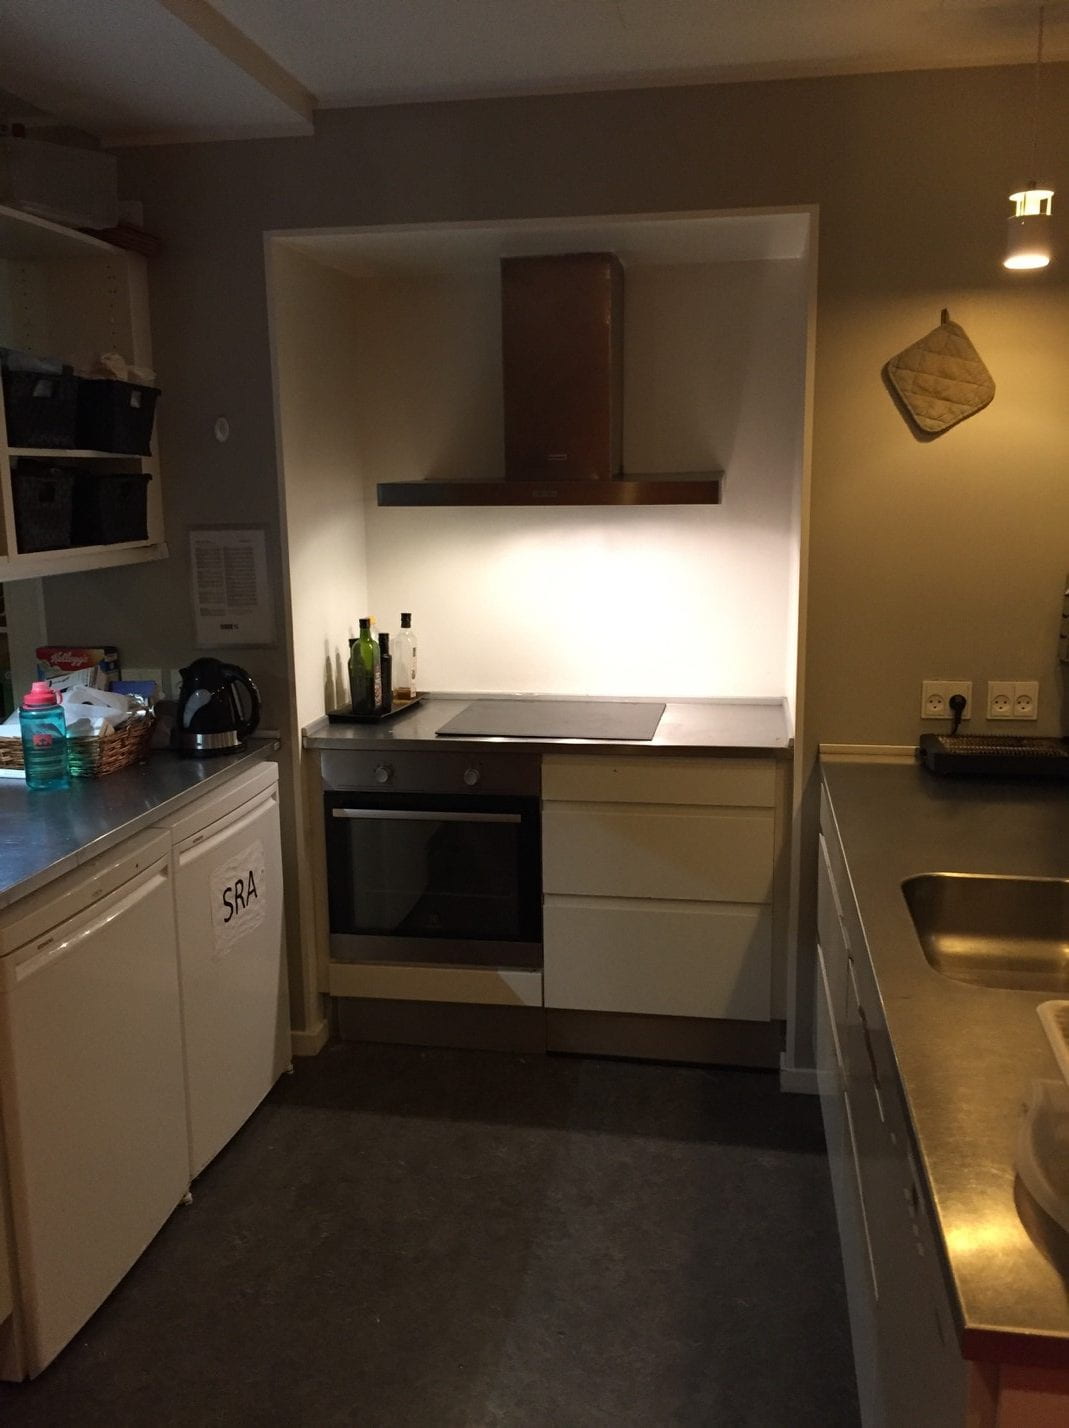 A dimly lit kitchen with white cupboards